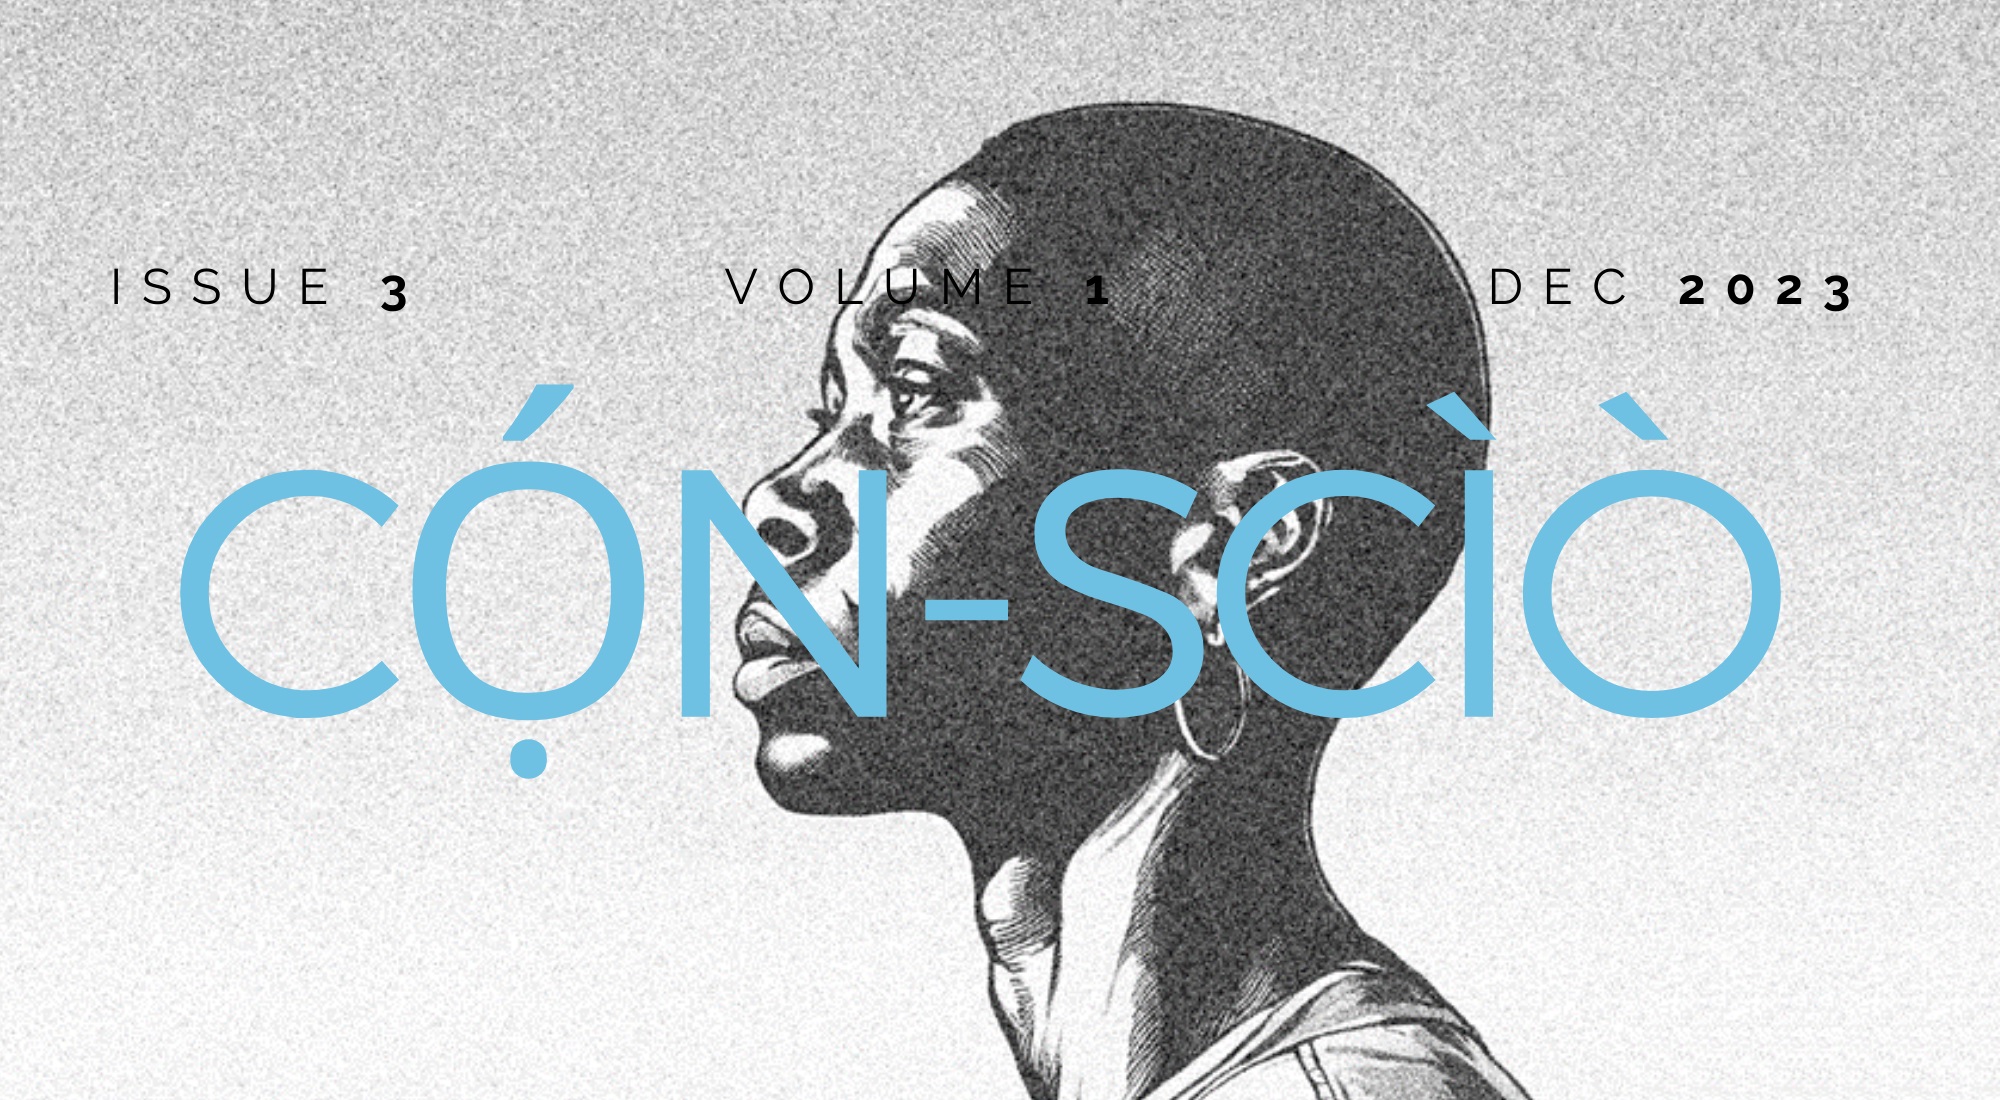 CALL FOR SUBMISSIONS: ‘MIGRATION’ — CỌ́N-SCÌÒ MAGAZINE ISSUE 3, VOL 1, DECEMBER 2023